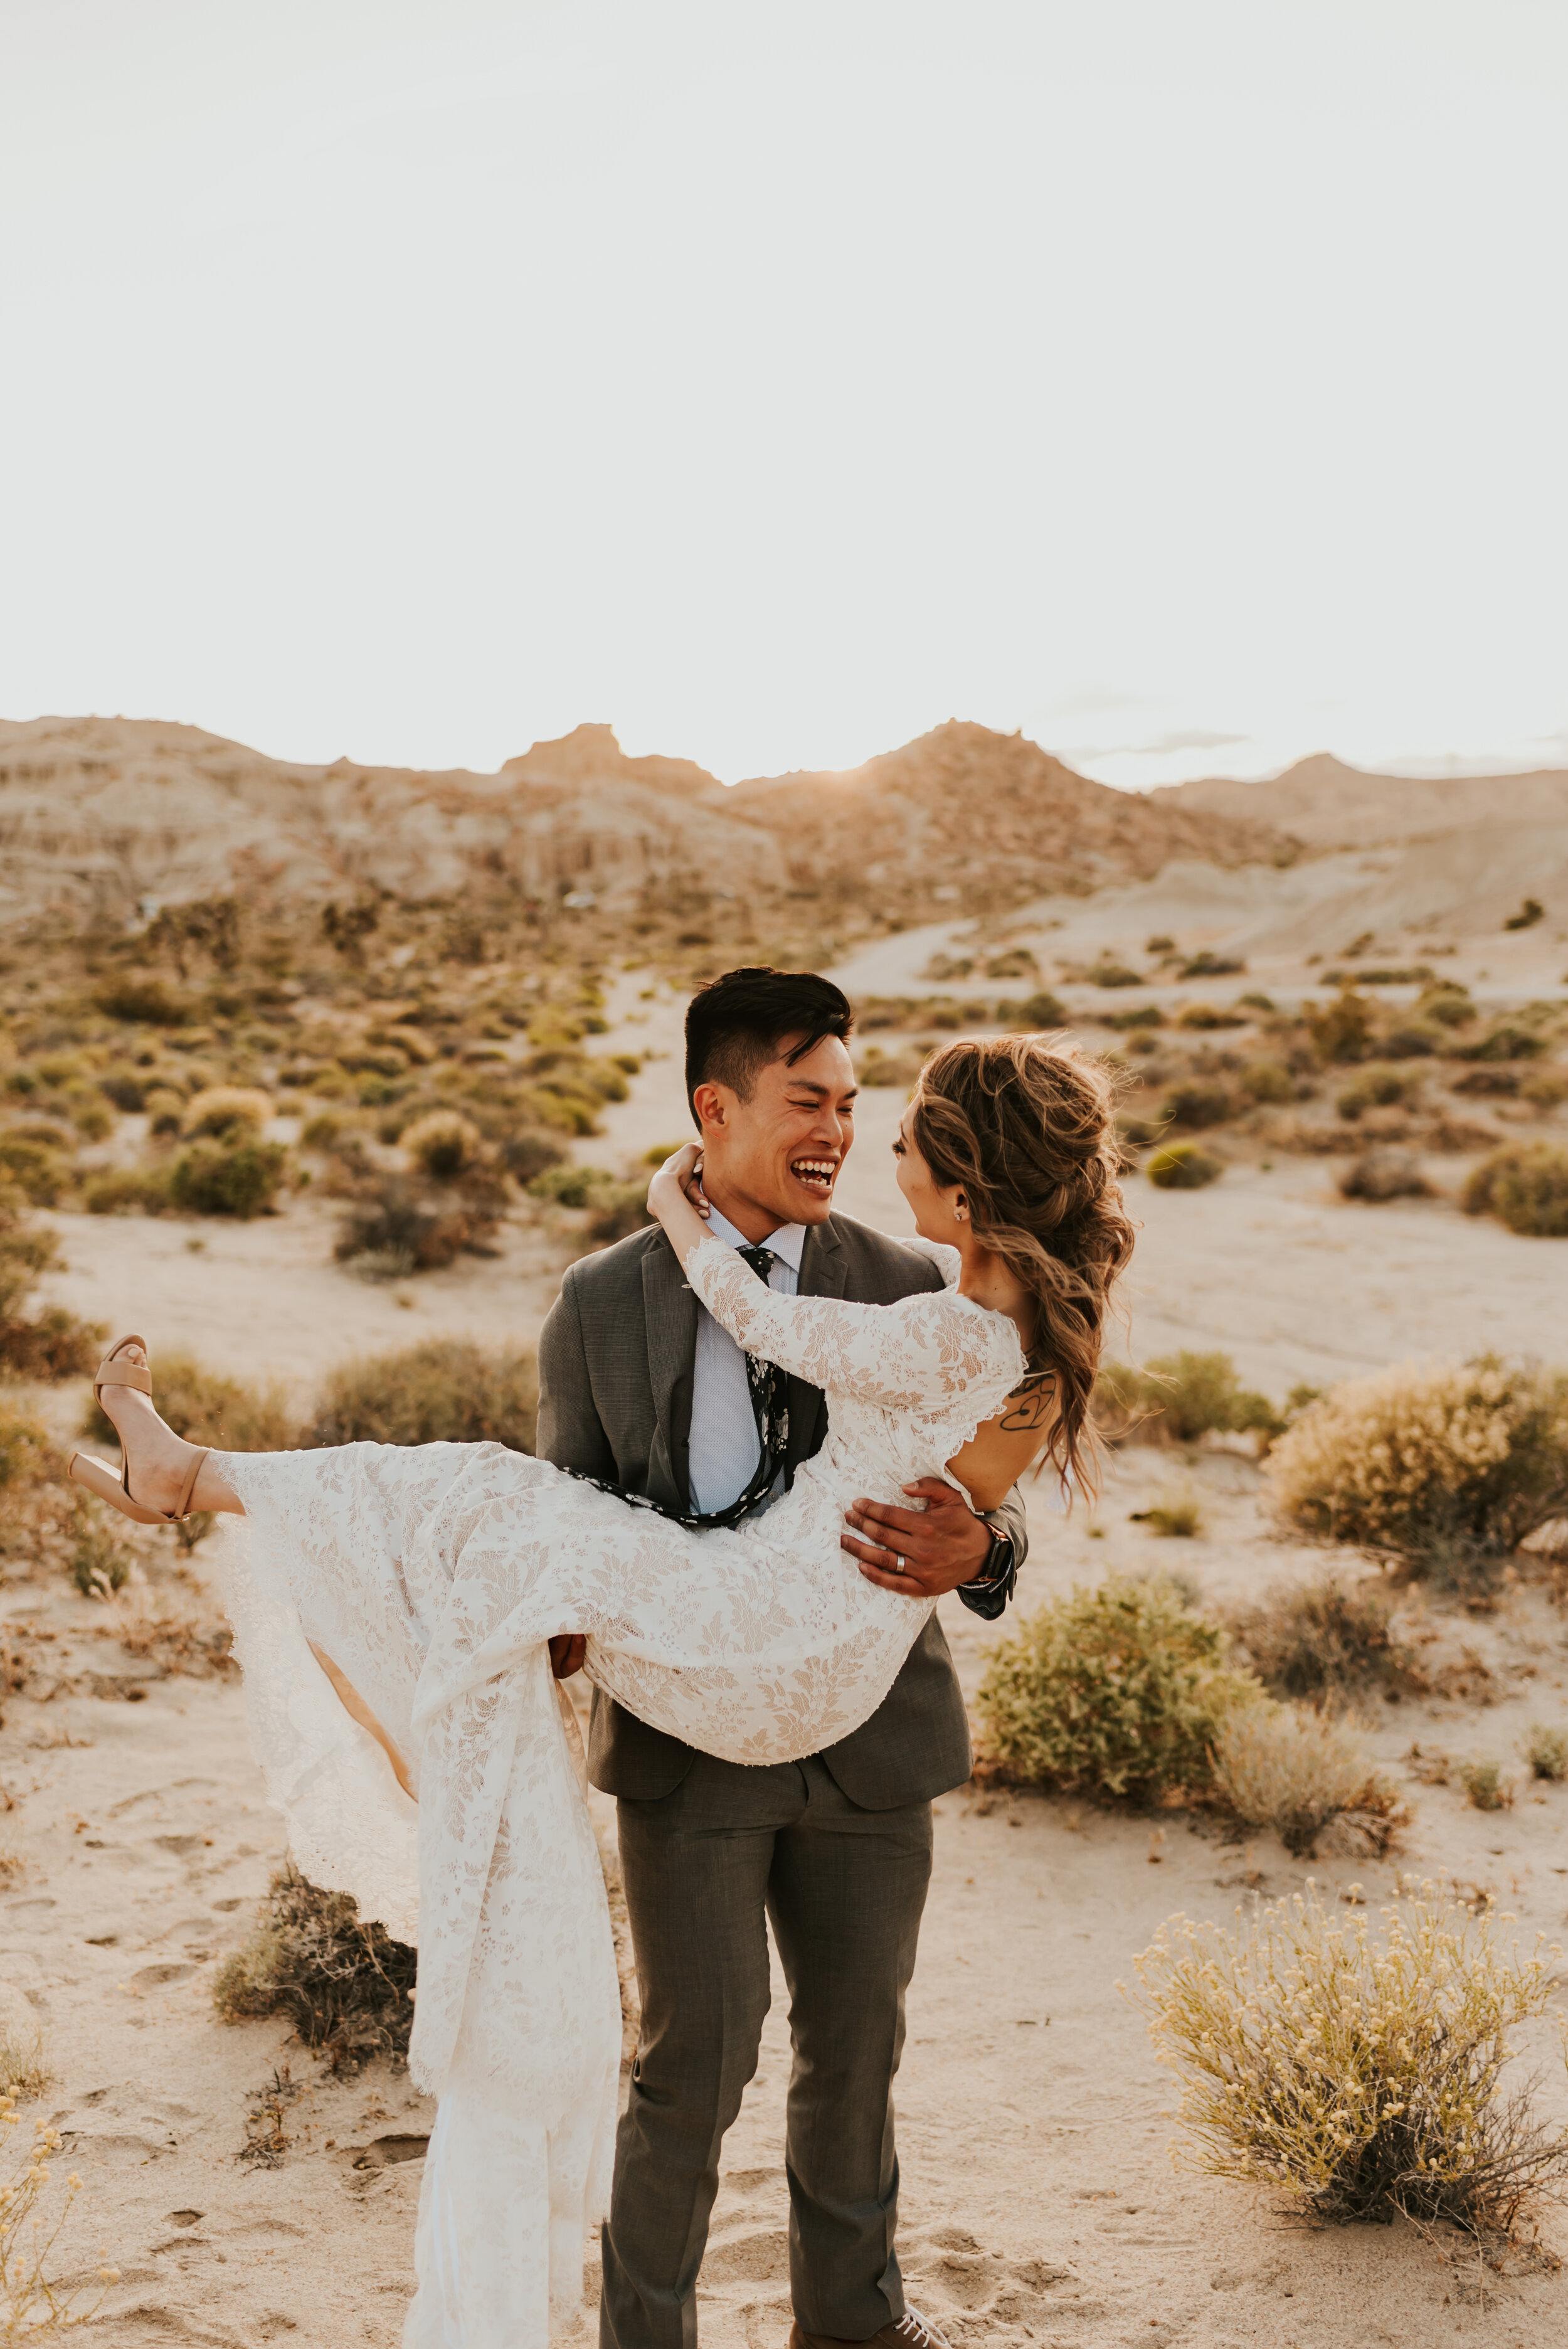 Red Rock Canyon Elopement | Southern California Elopement Photographer | Destination Elopement | Desert Elopement | Places to Elope | #elopement